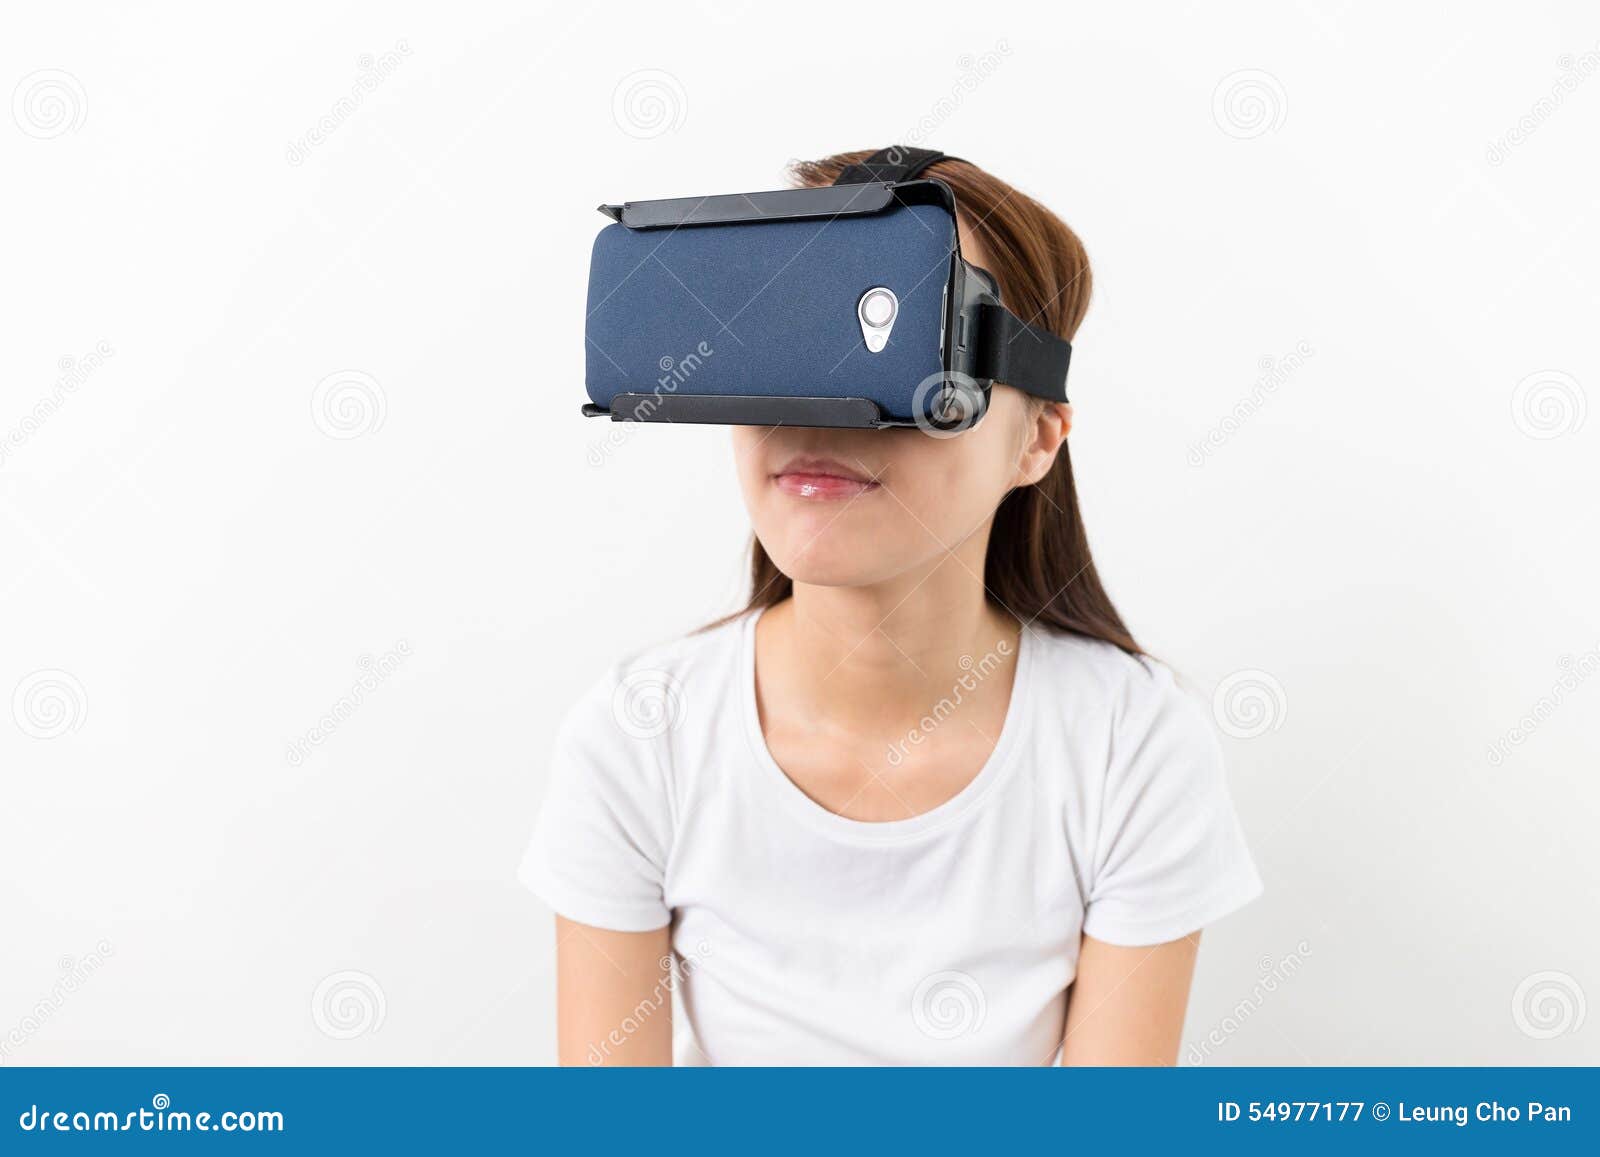 young woman watching though the vr device